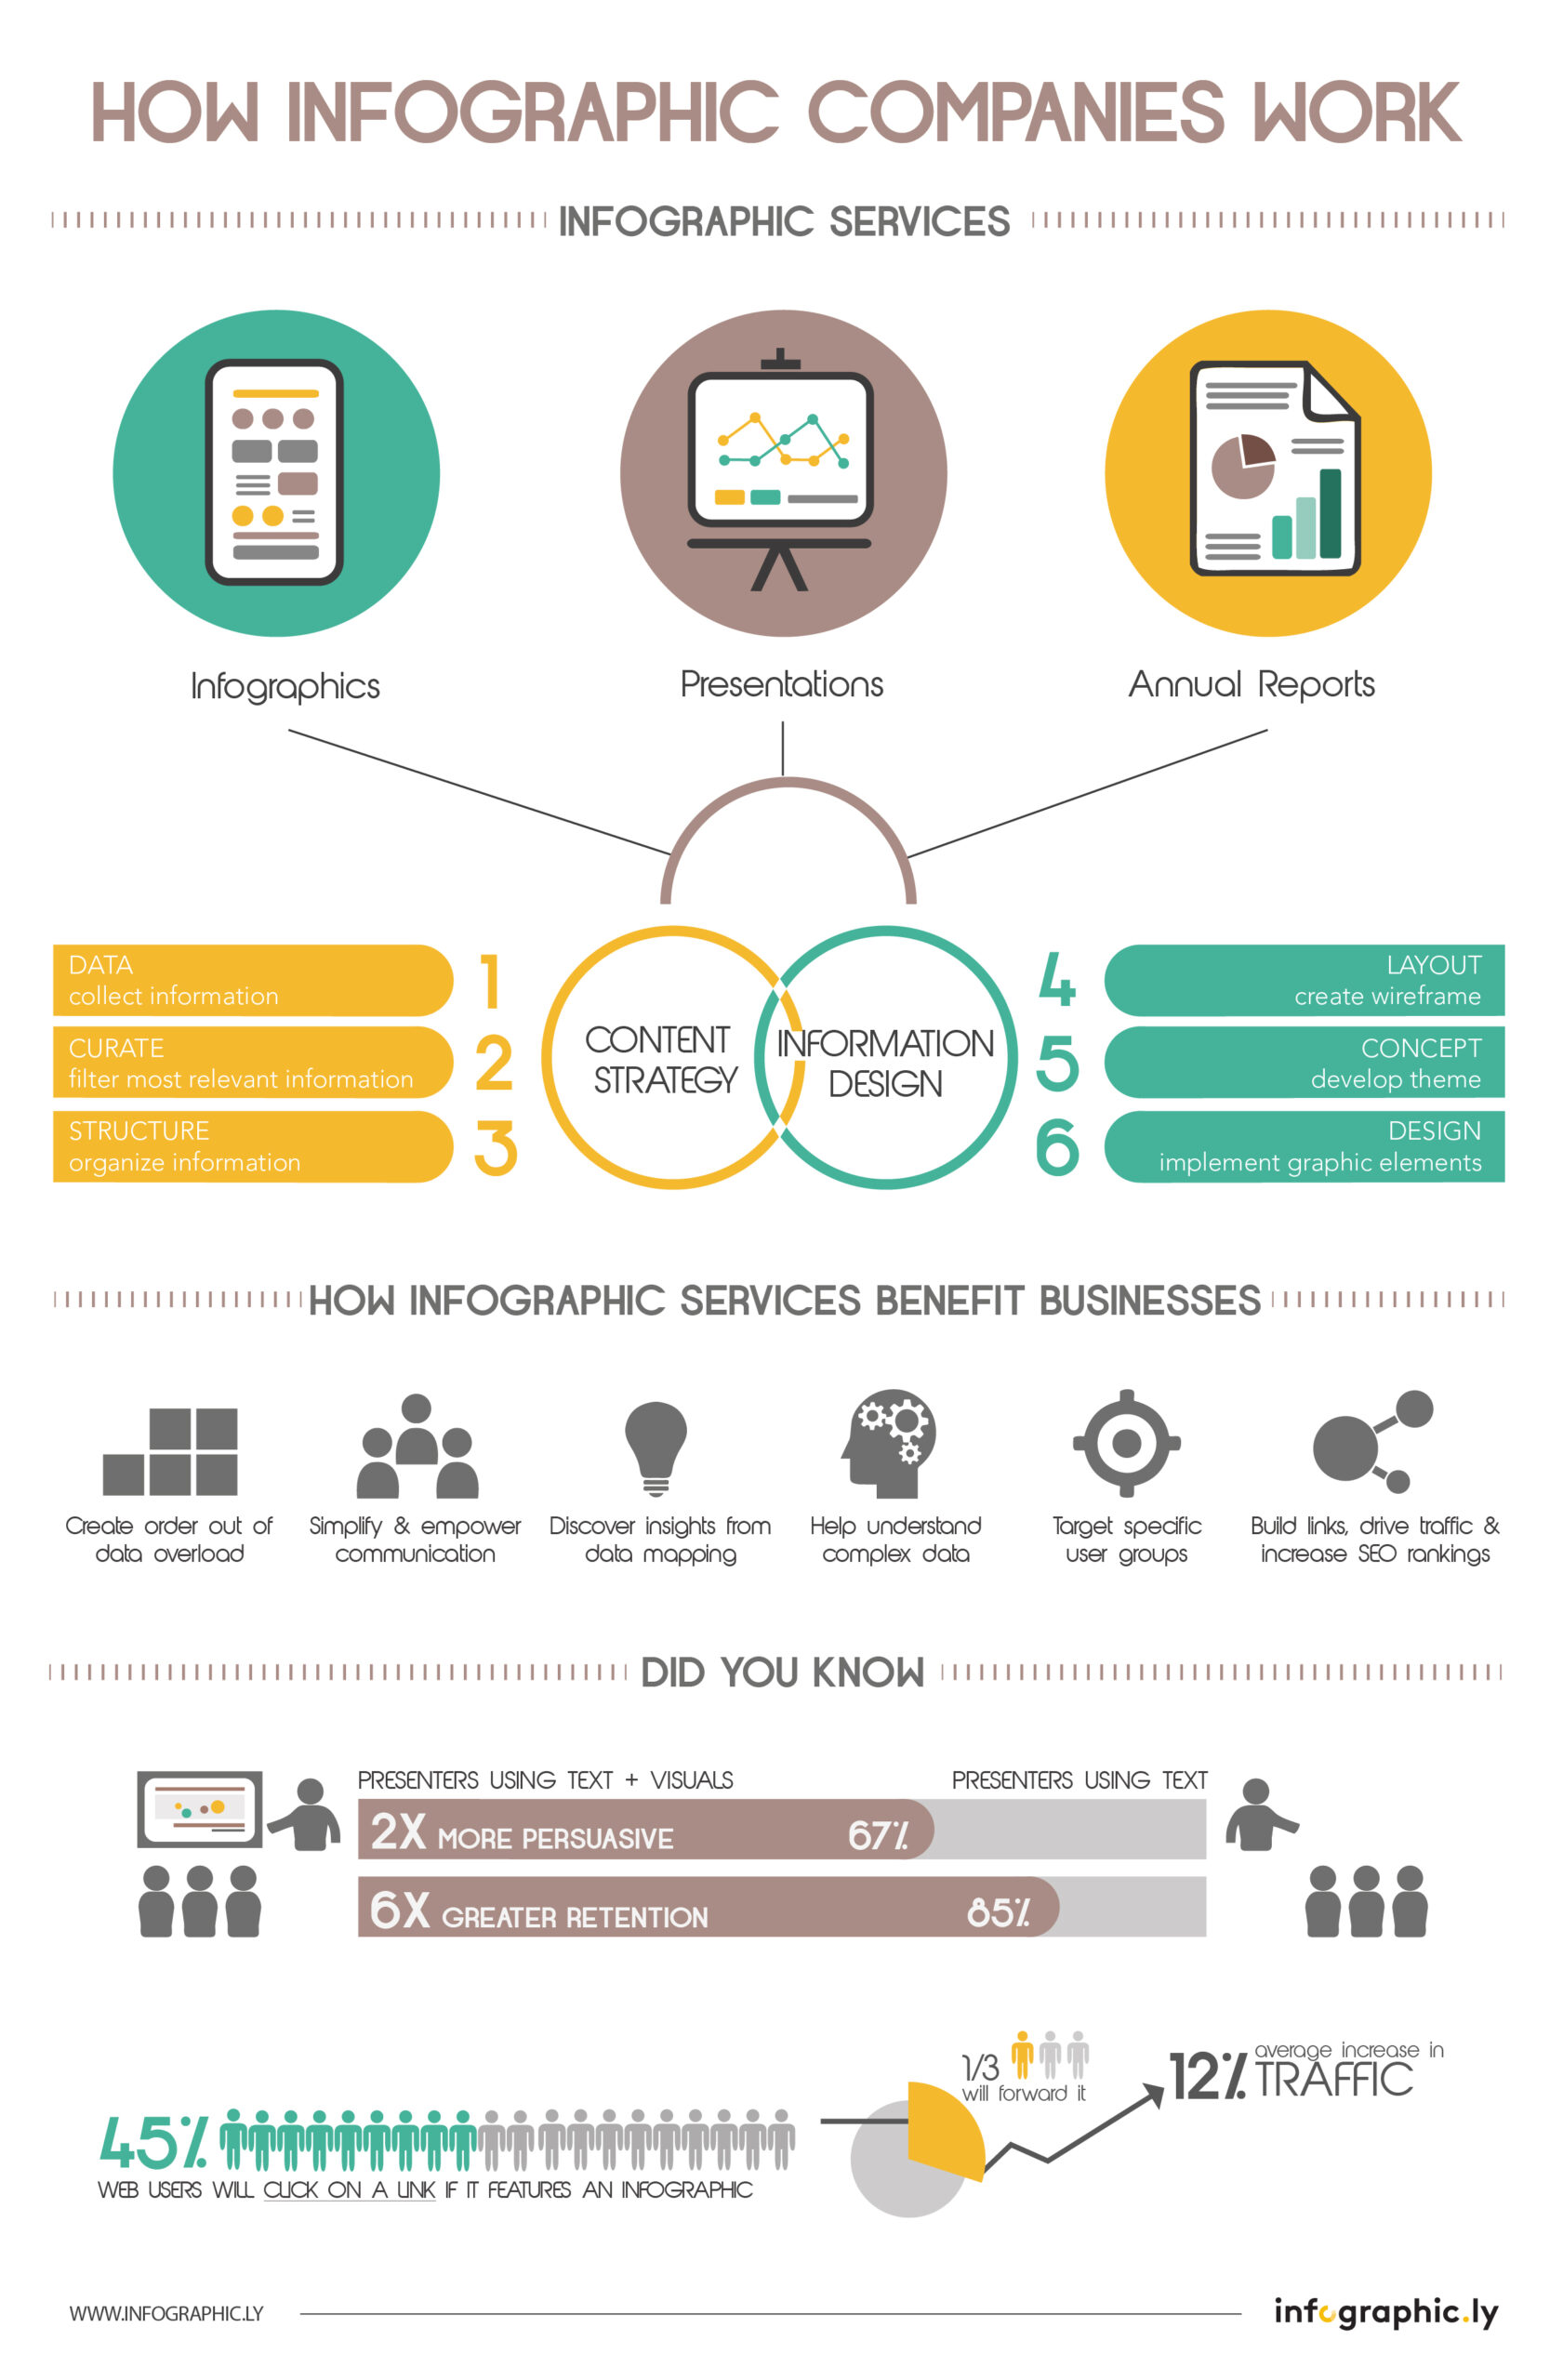 7+ Business Infographic Inspiration Examples & Templates  Daily Design Inspiration #7